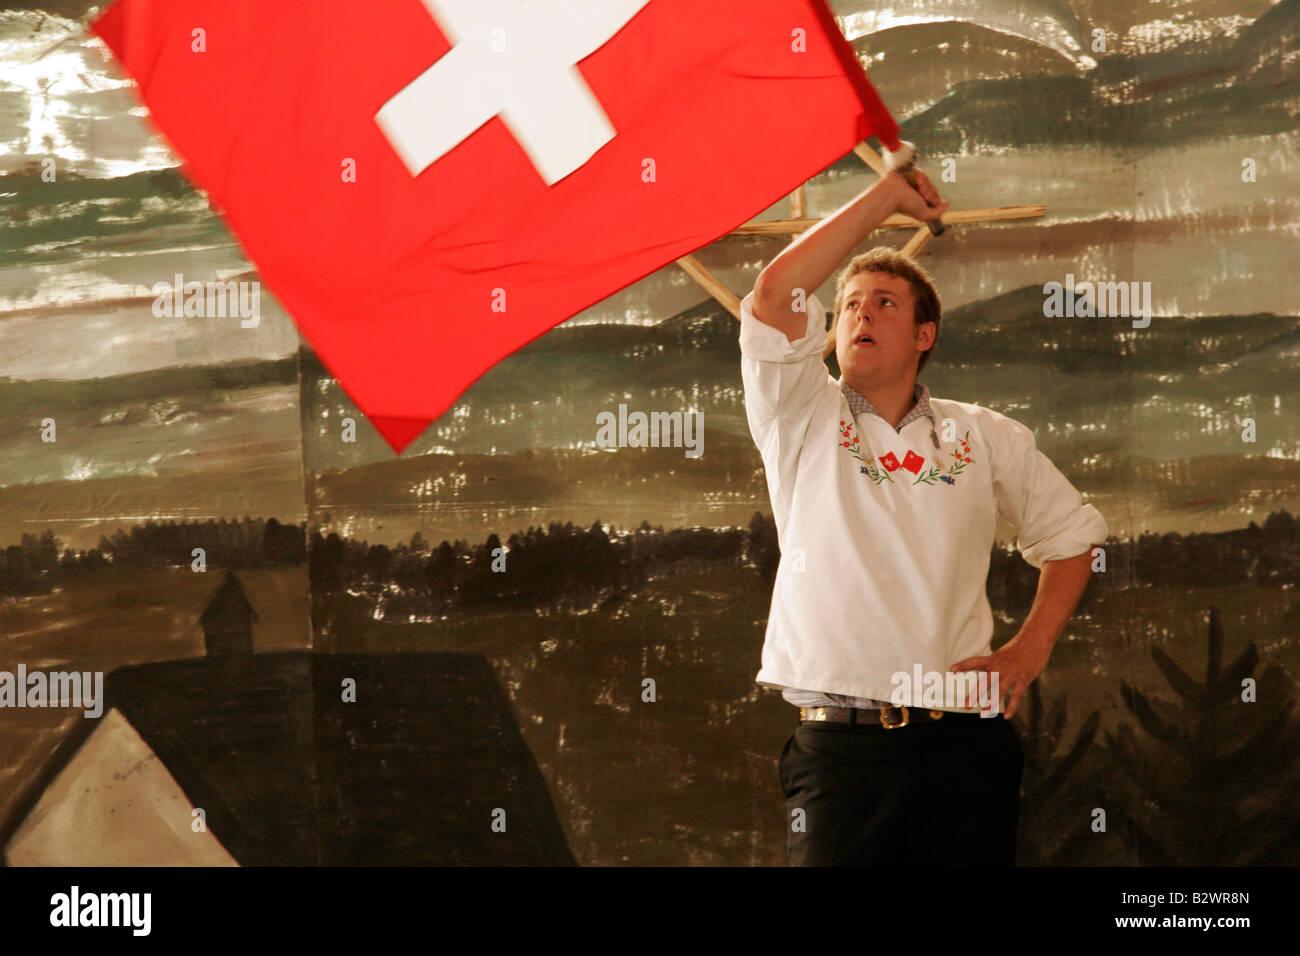 Swiss man in traditional costume competes in flag throwing during Jodlerfest in Malters, near Lucerne, Central Switzerland Stock Photo